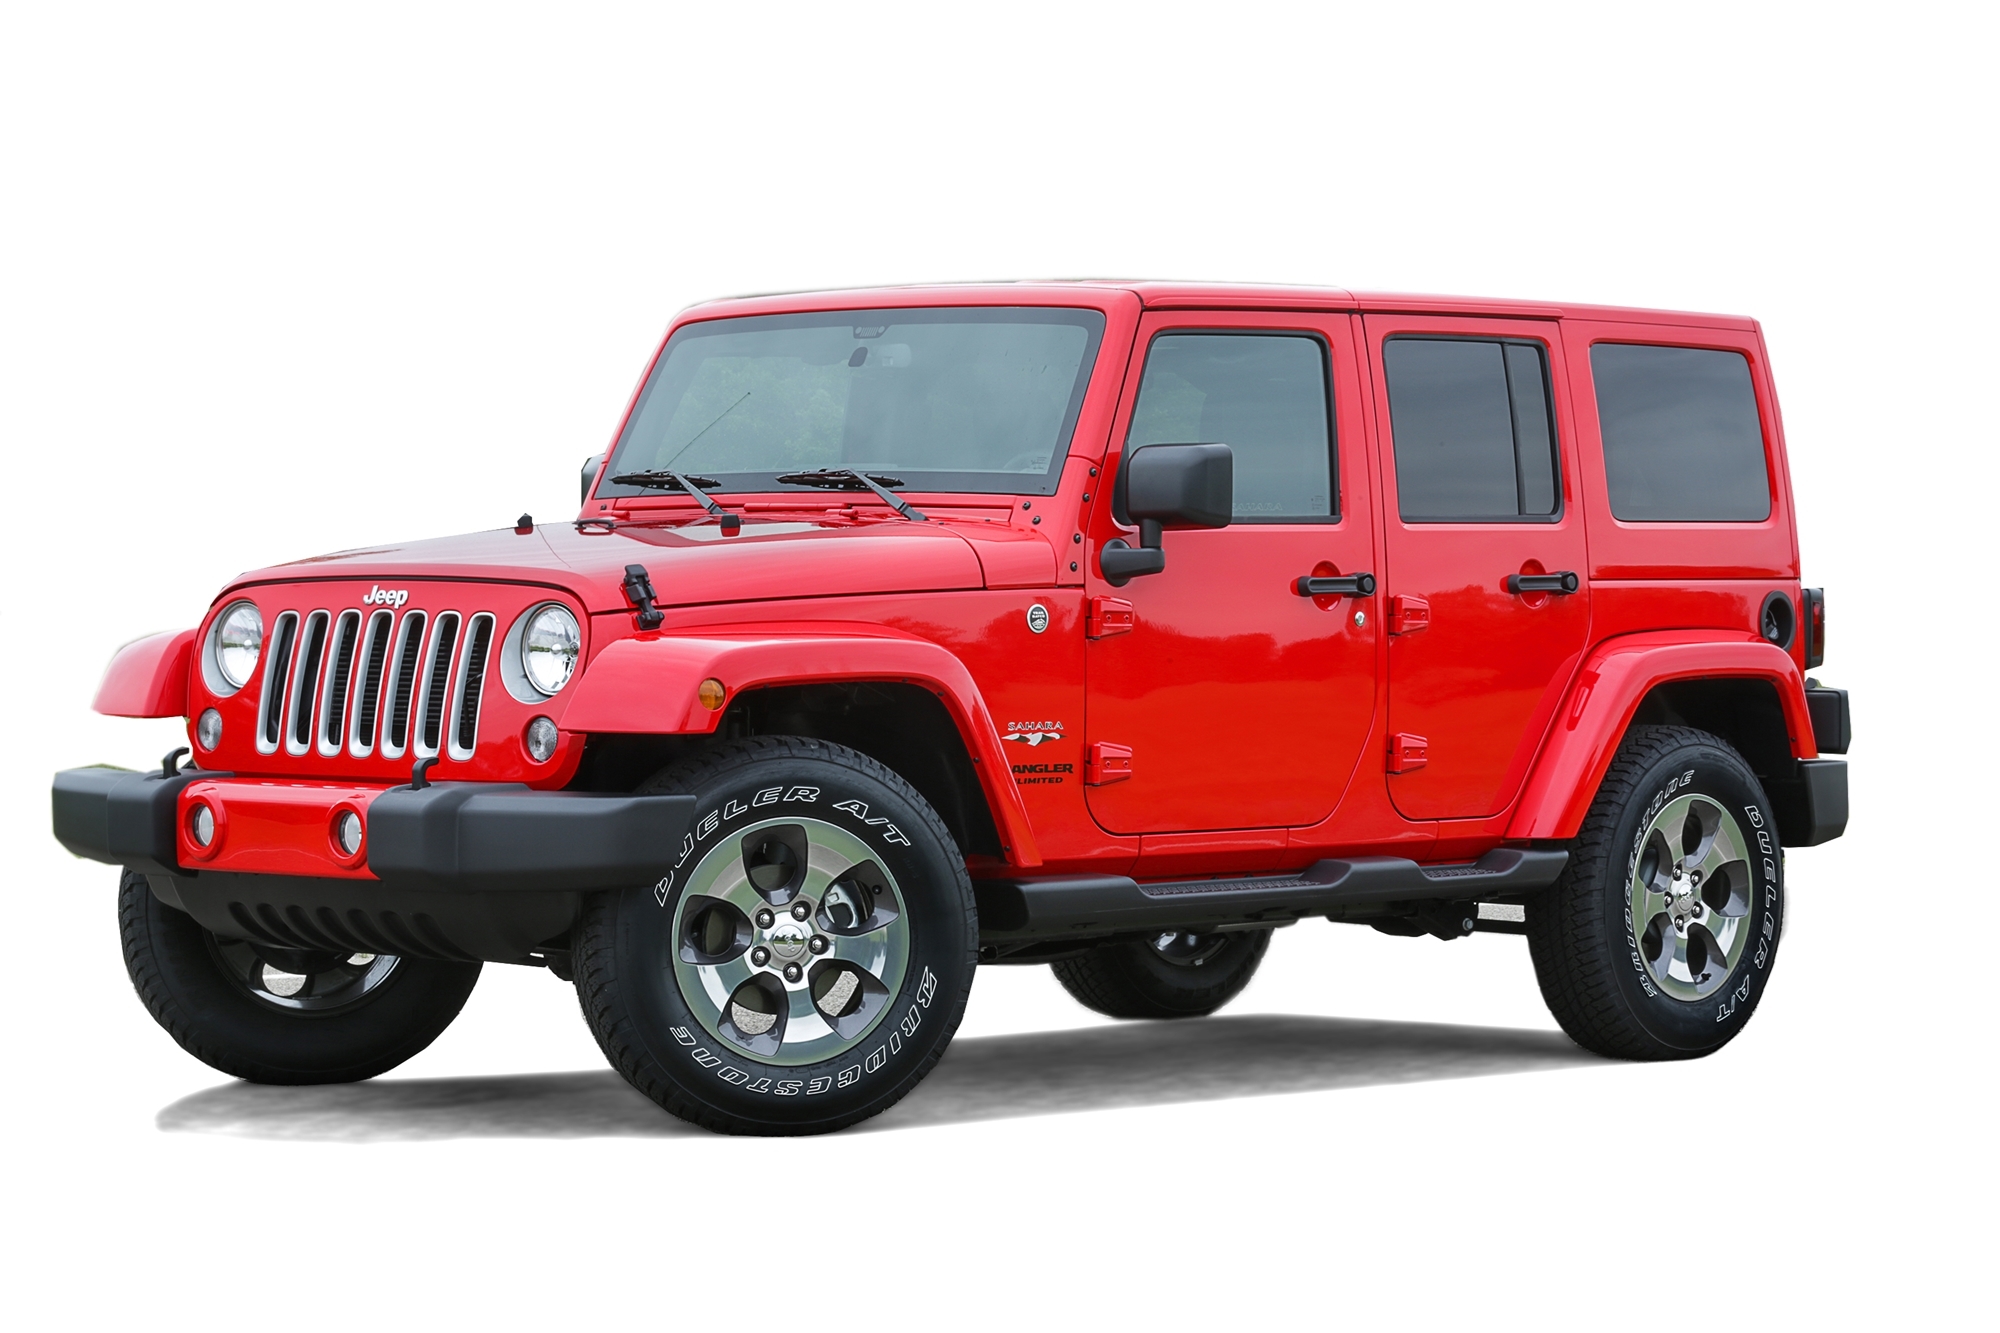 2016 Jeep Wrangler Unlimited Black Bear Full Specs, Features and Price |  CarBuzz